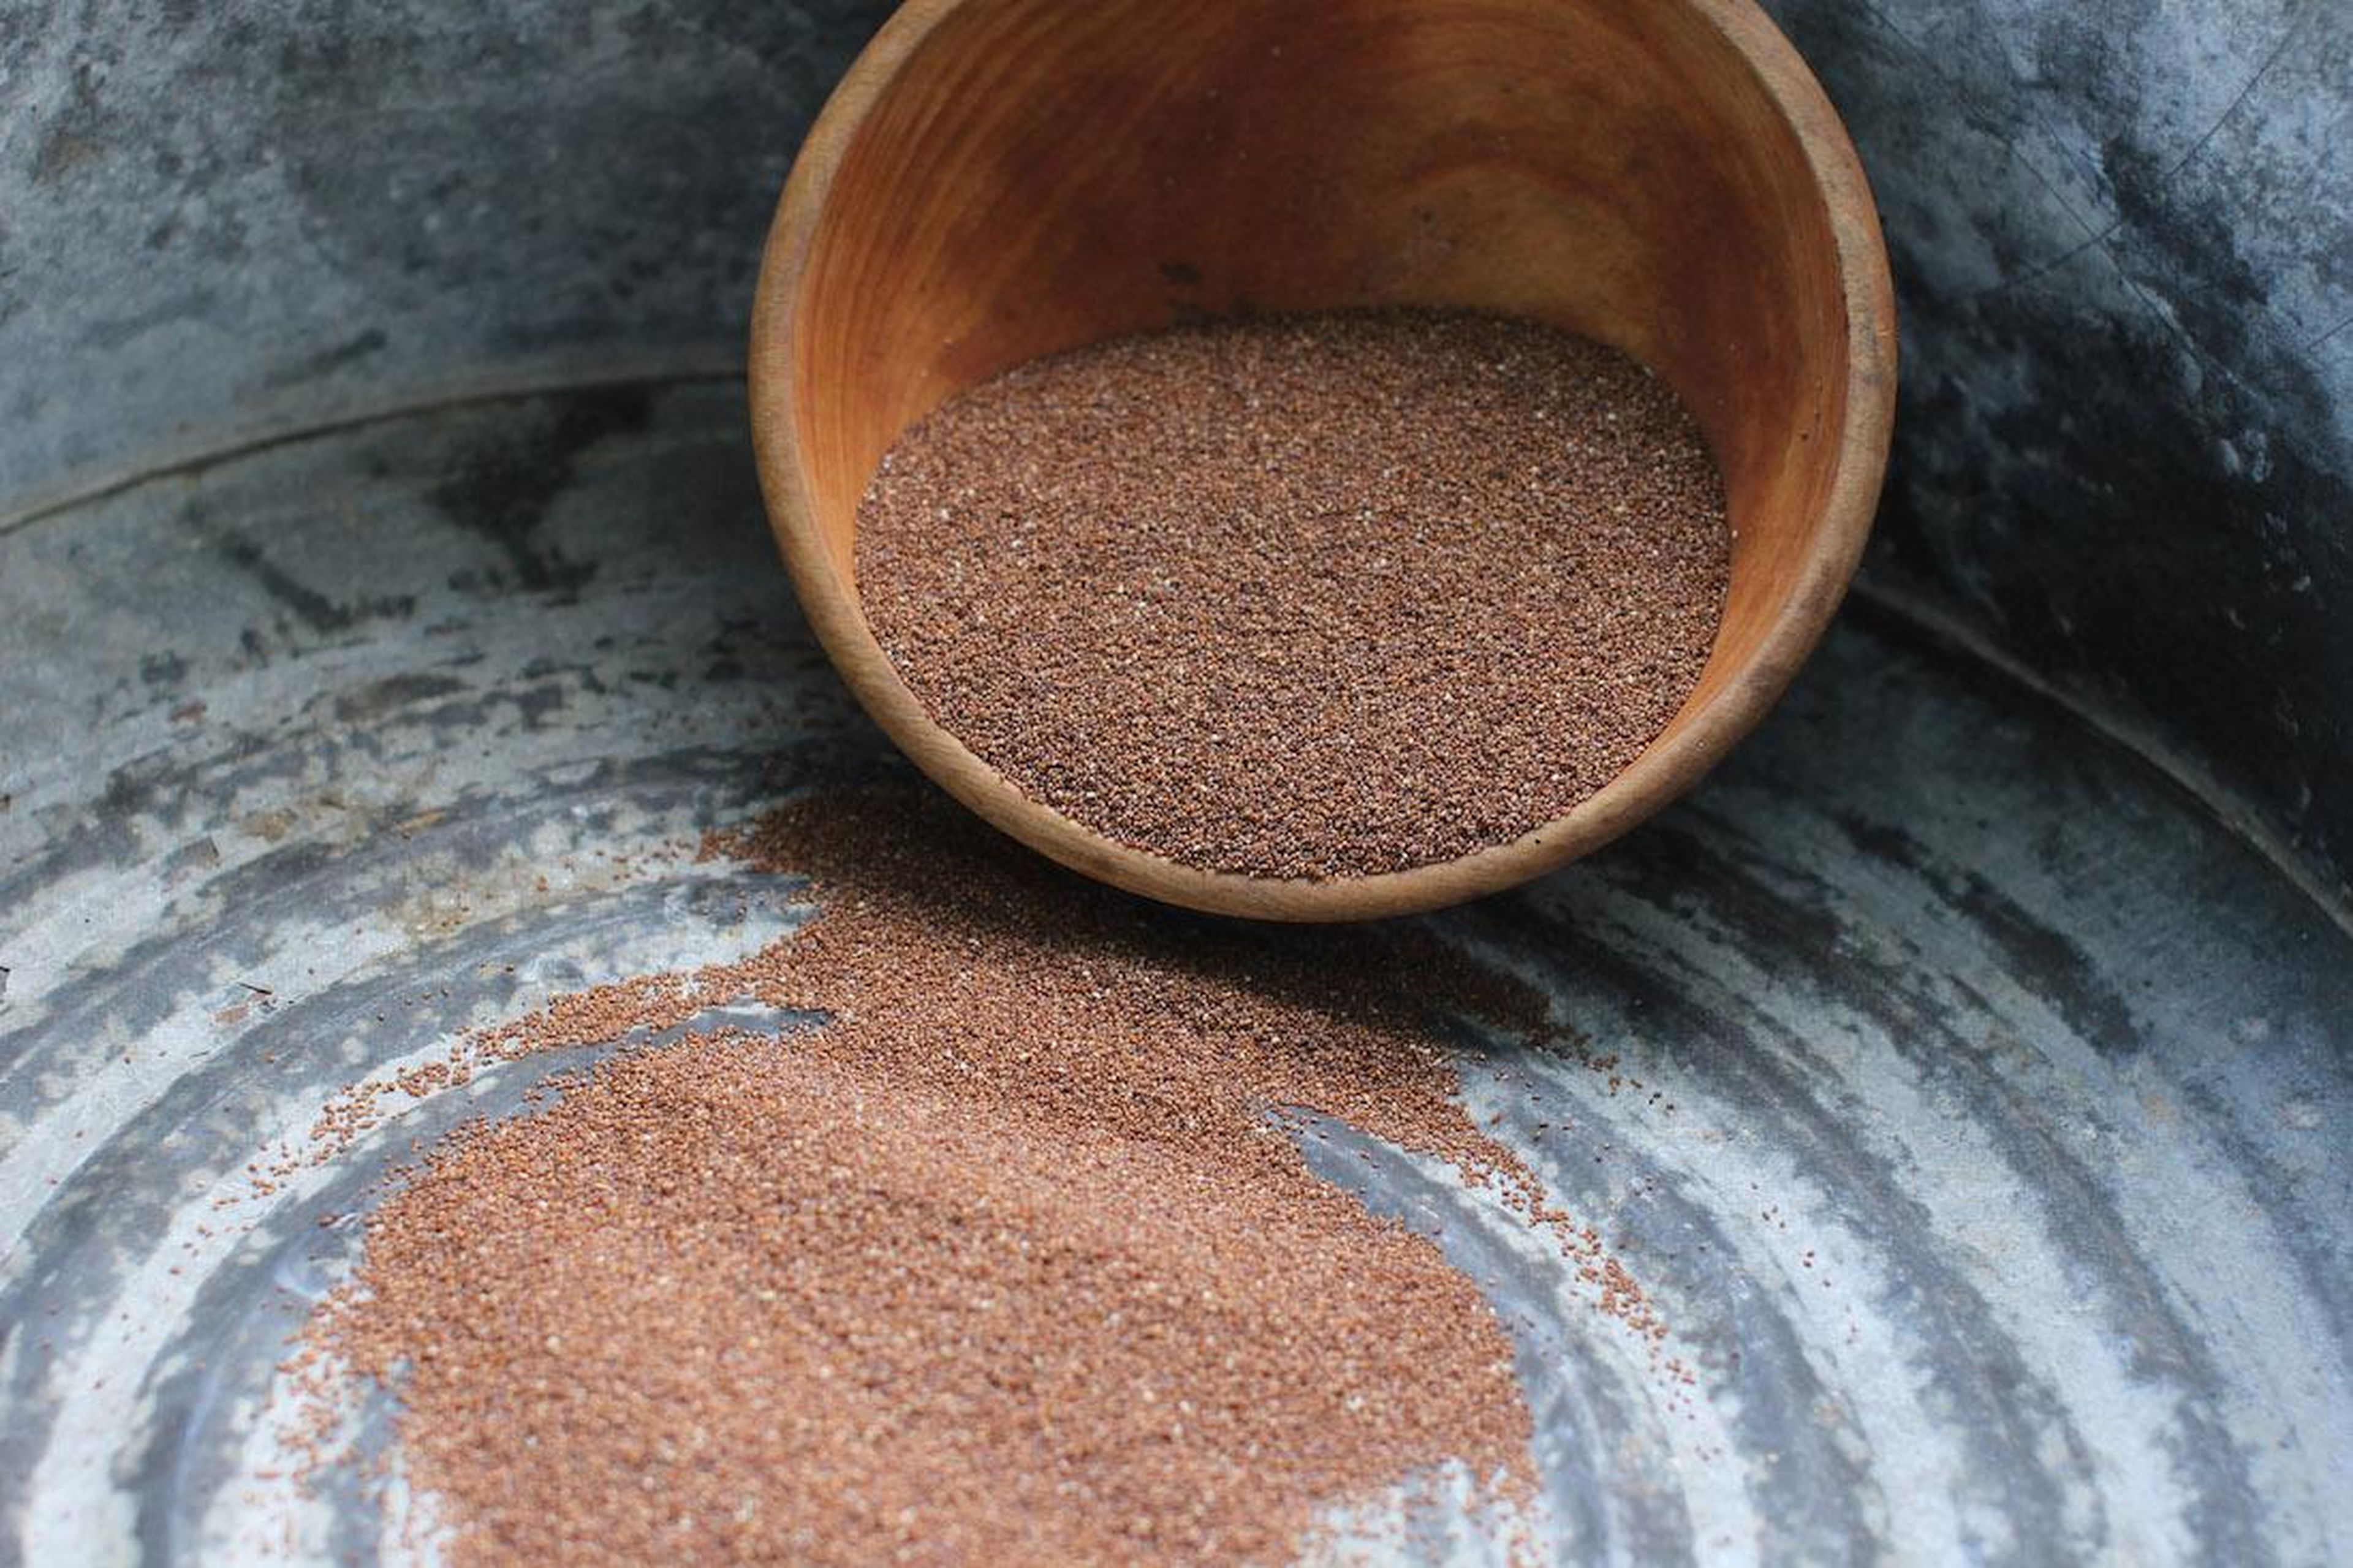 Teff is a tiny grain that has been cultivated for centuries in Ethiopia and Eritrea.